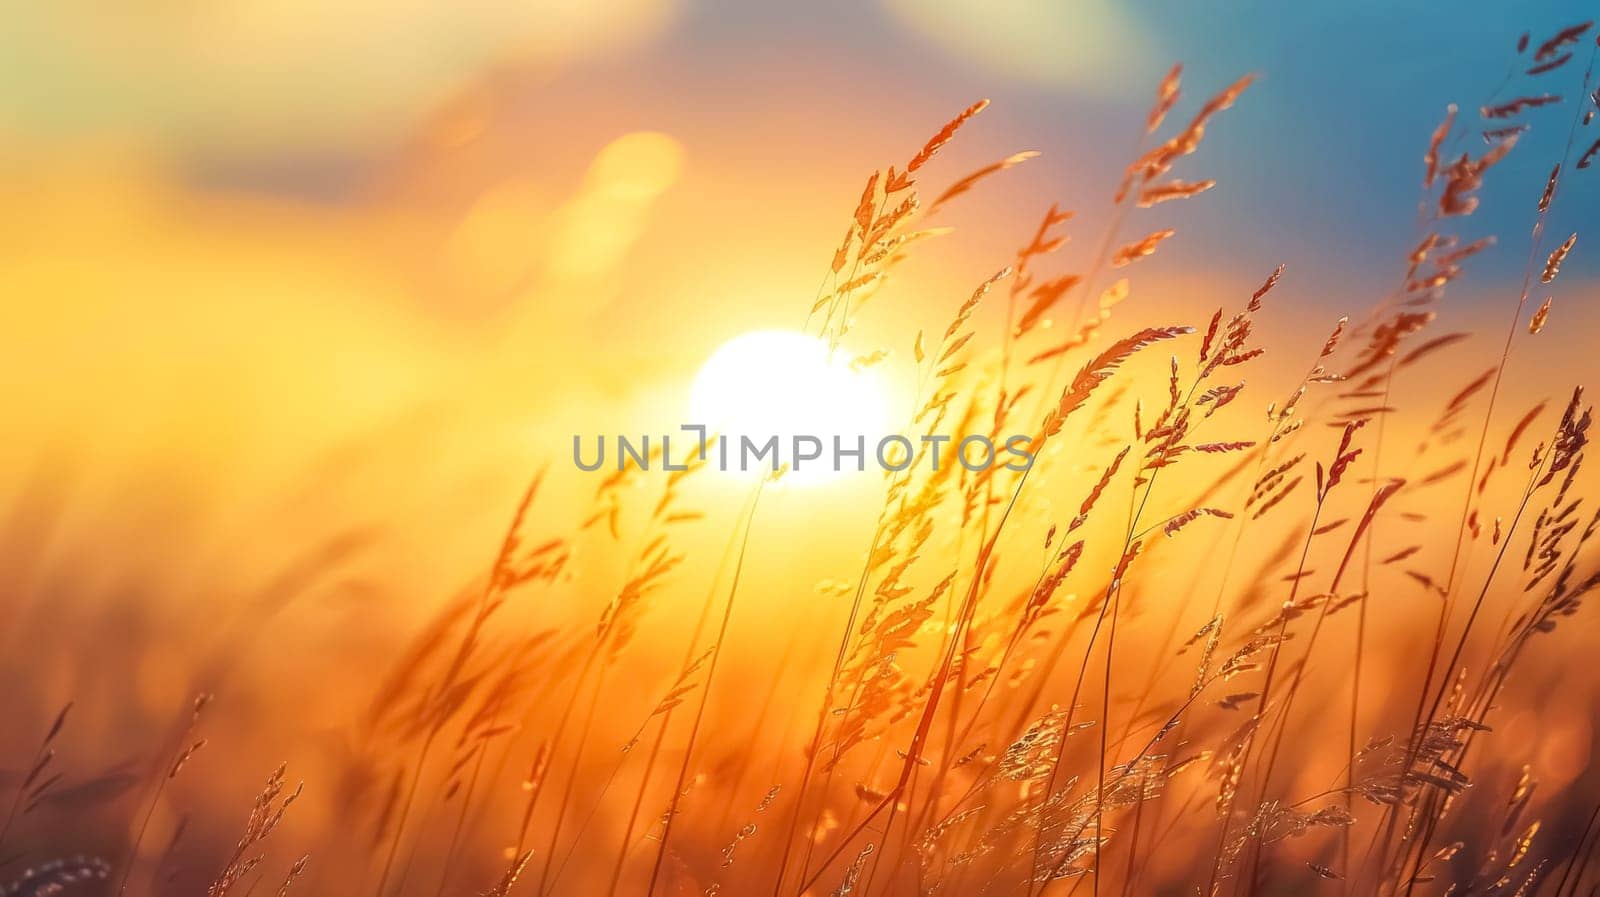 Warm sunlight filters through a field of wheat at sunset, creating a tranquil mood